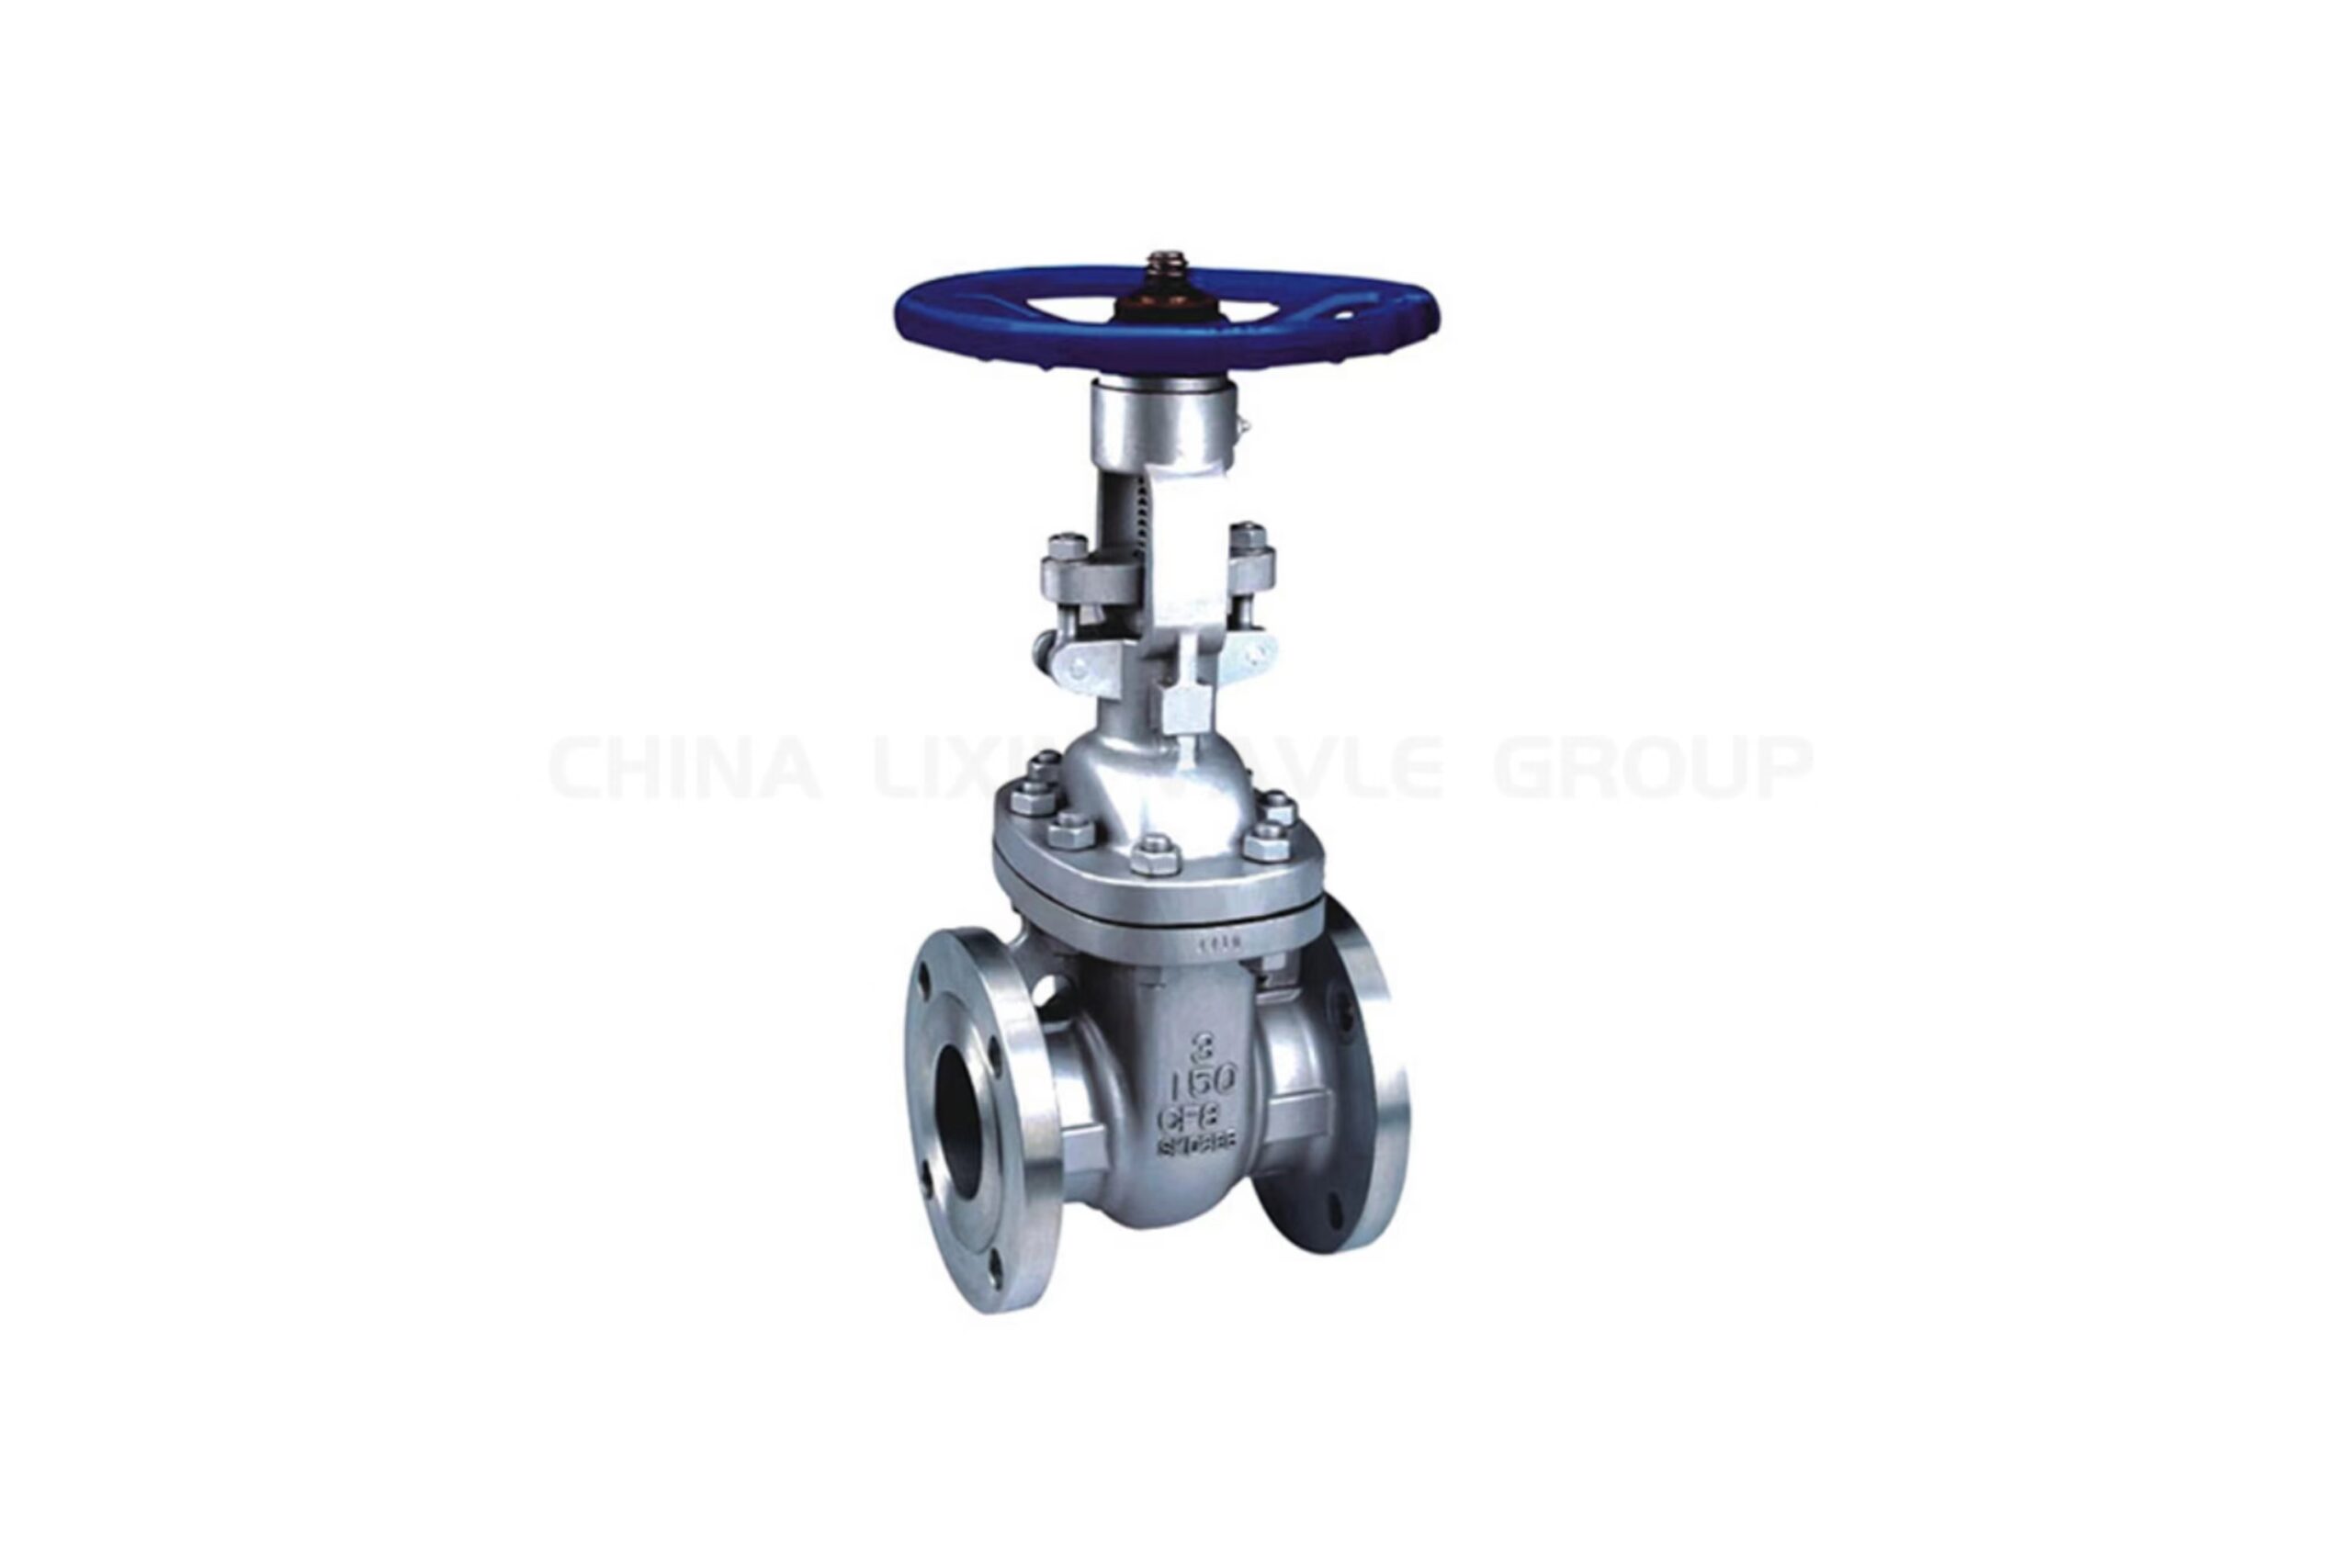 A close-up of a gate valve with a round handle. The valve is made of metal and is used to control the flow of liquids or gases.